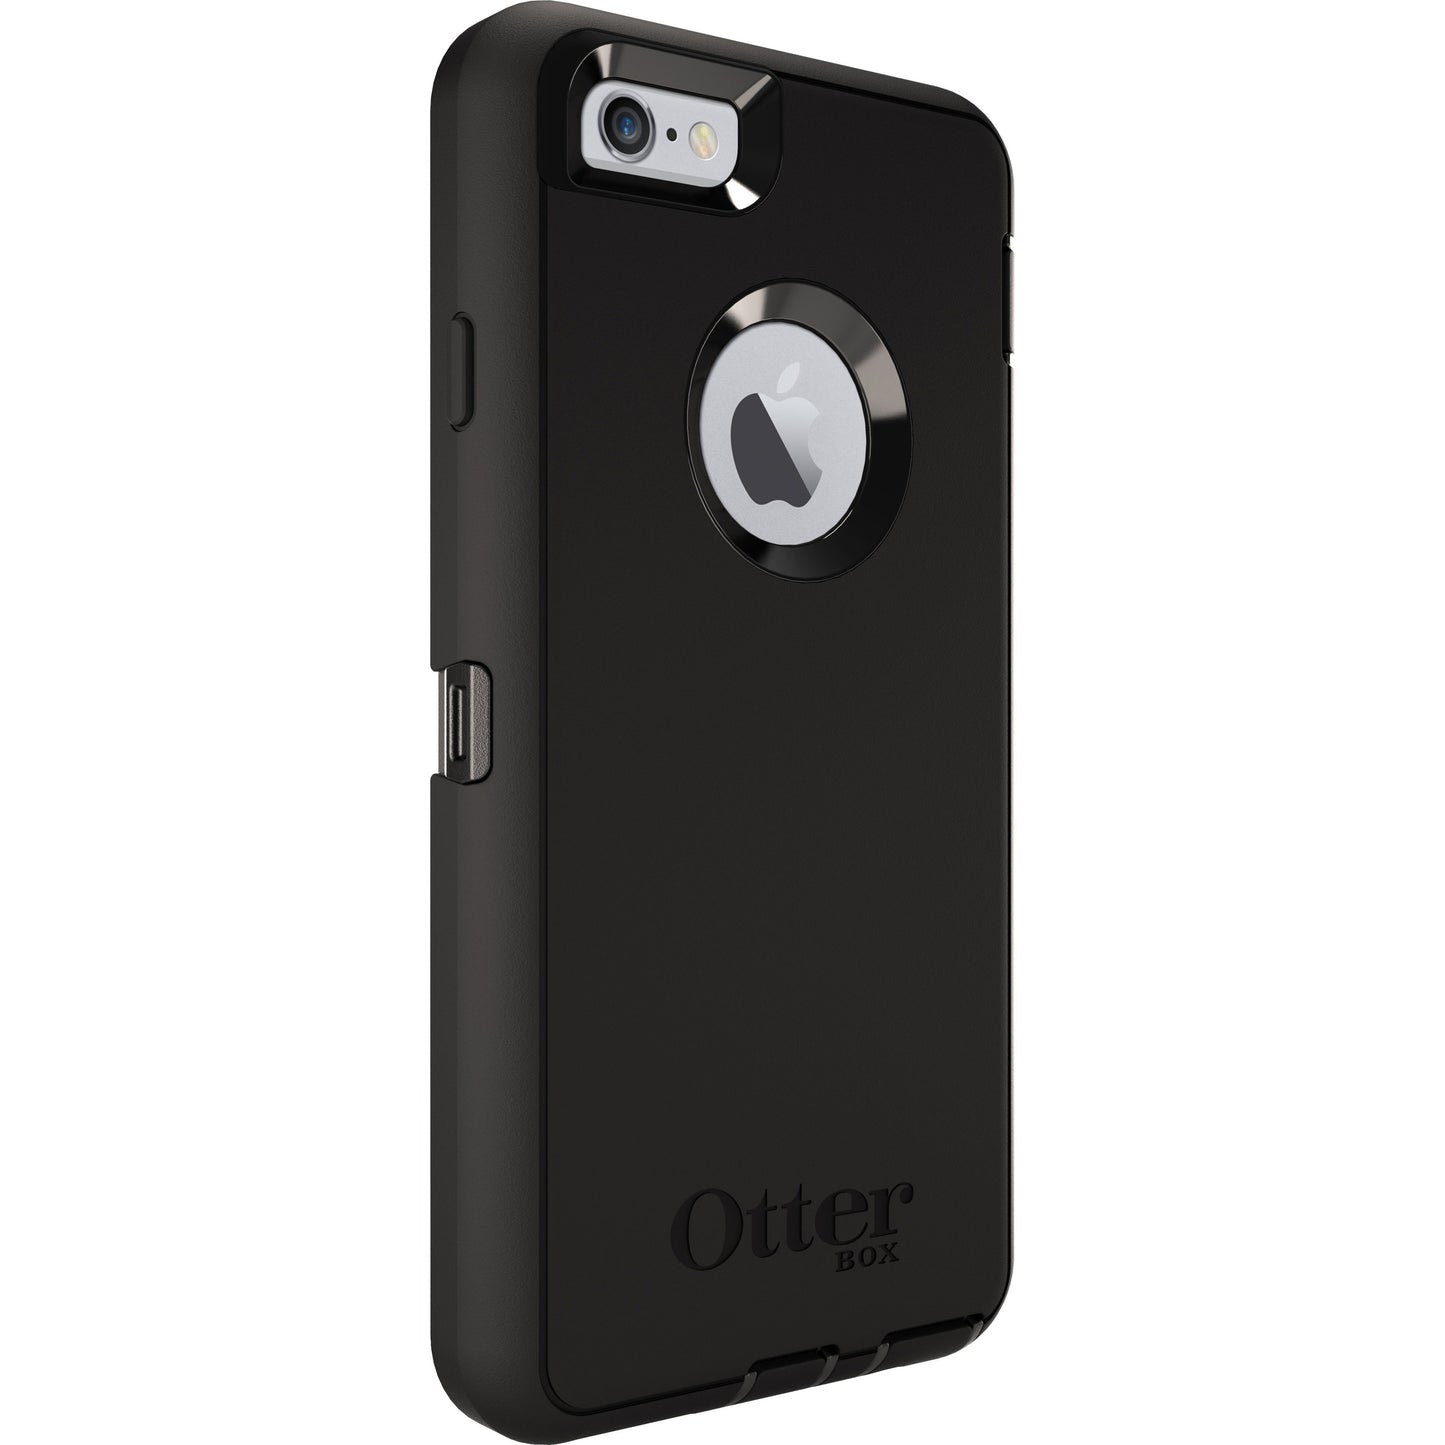 OtterBox Defender Carrying Case (Holster) Apple iPhone 6 iPhone 6s Smartphone - Black